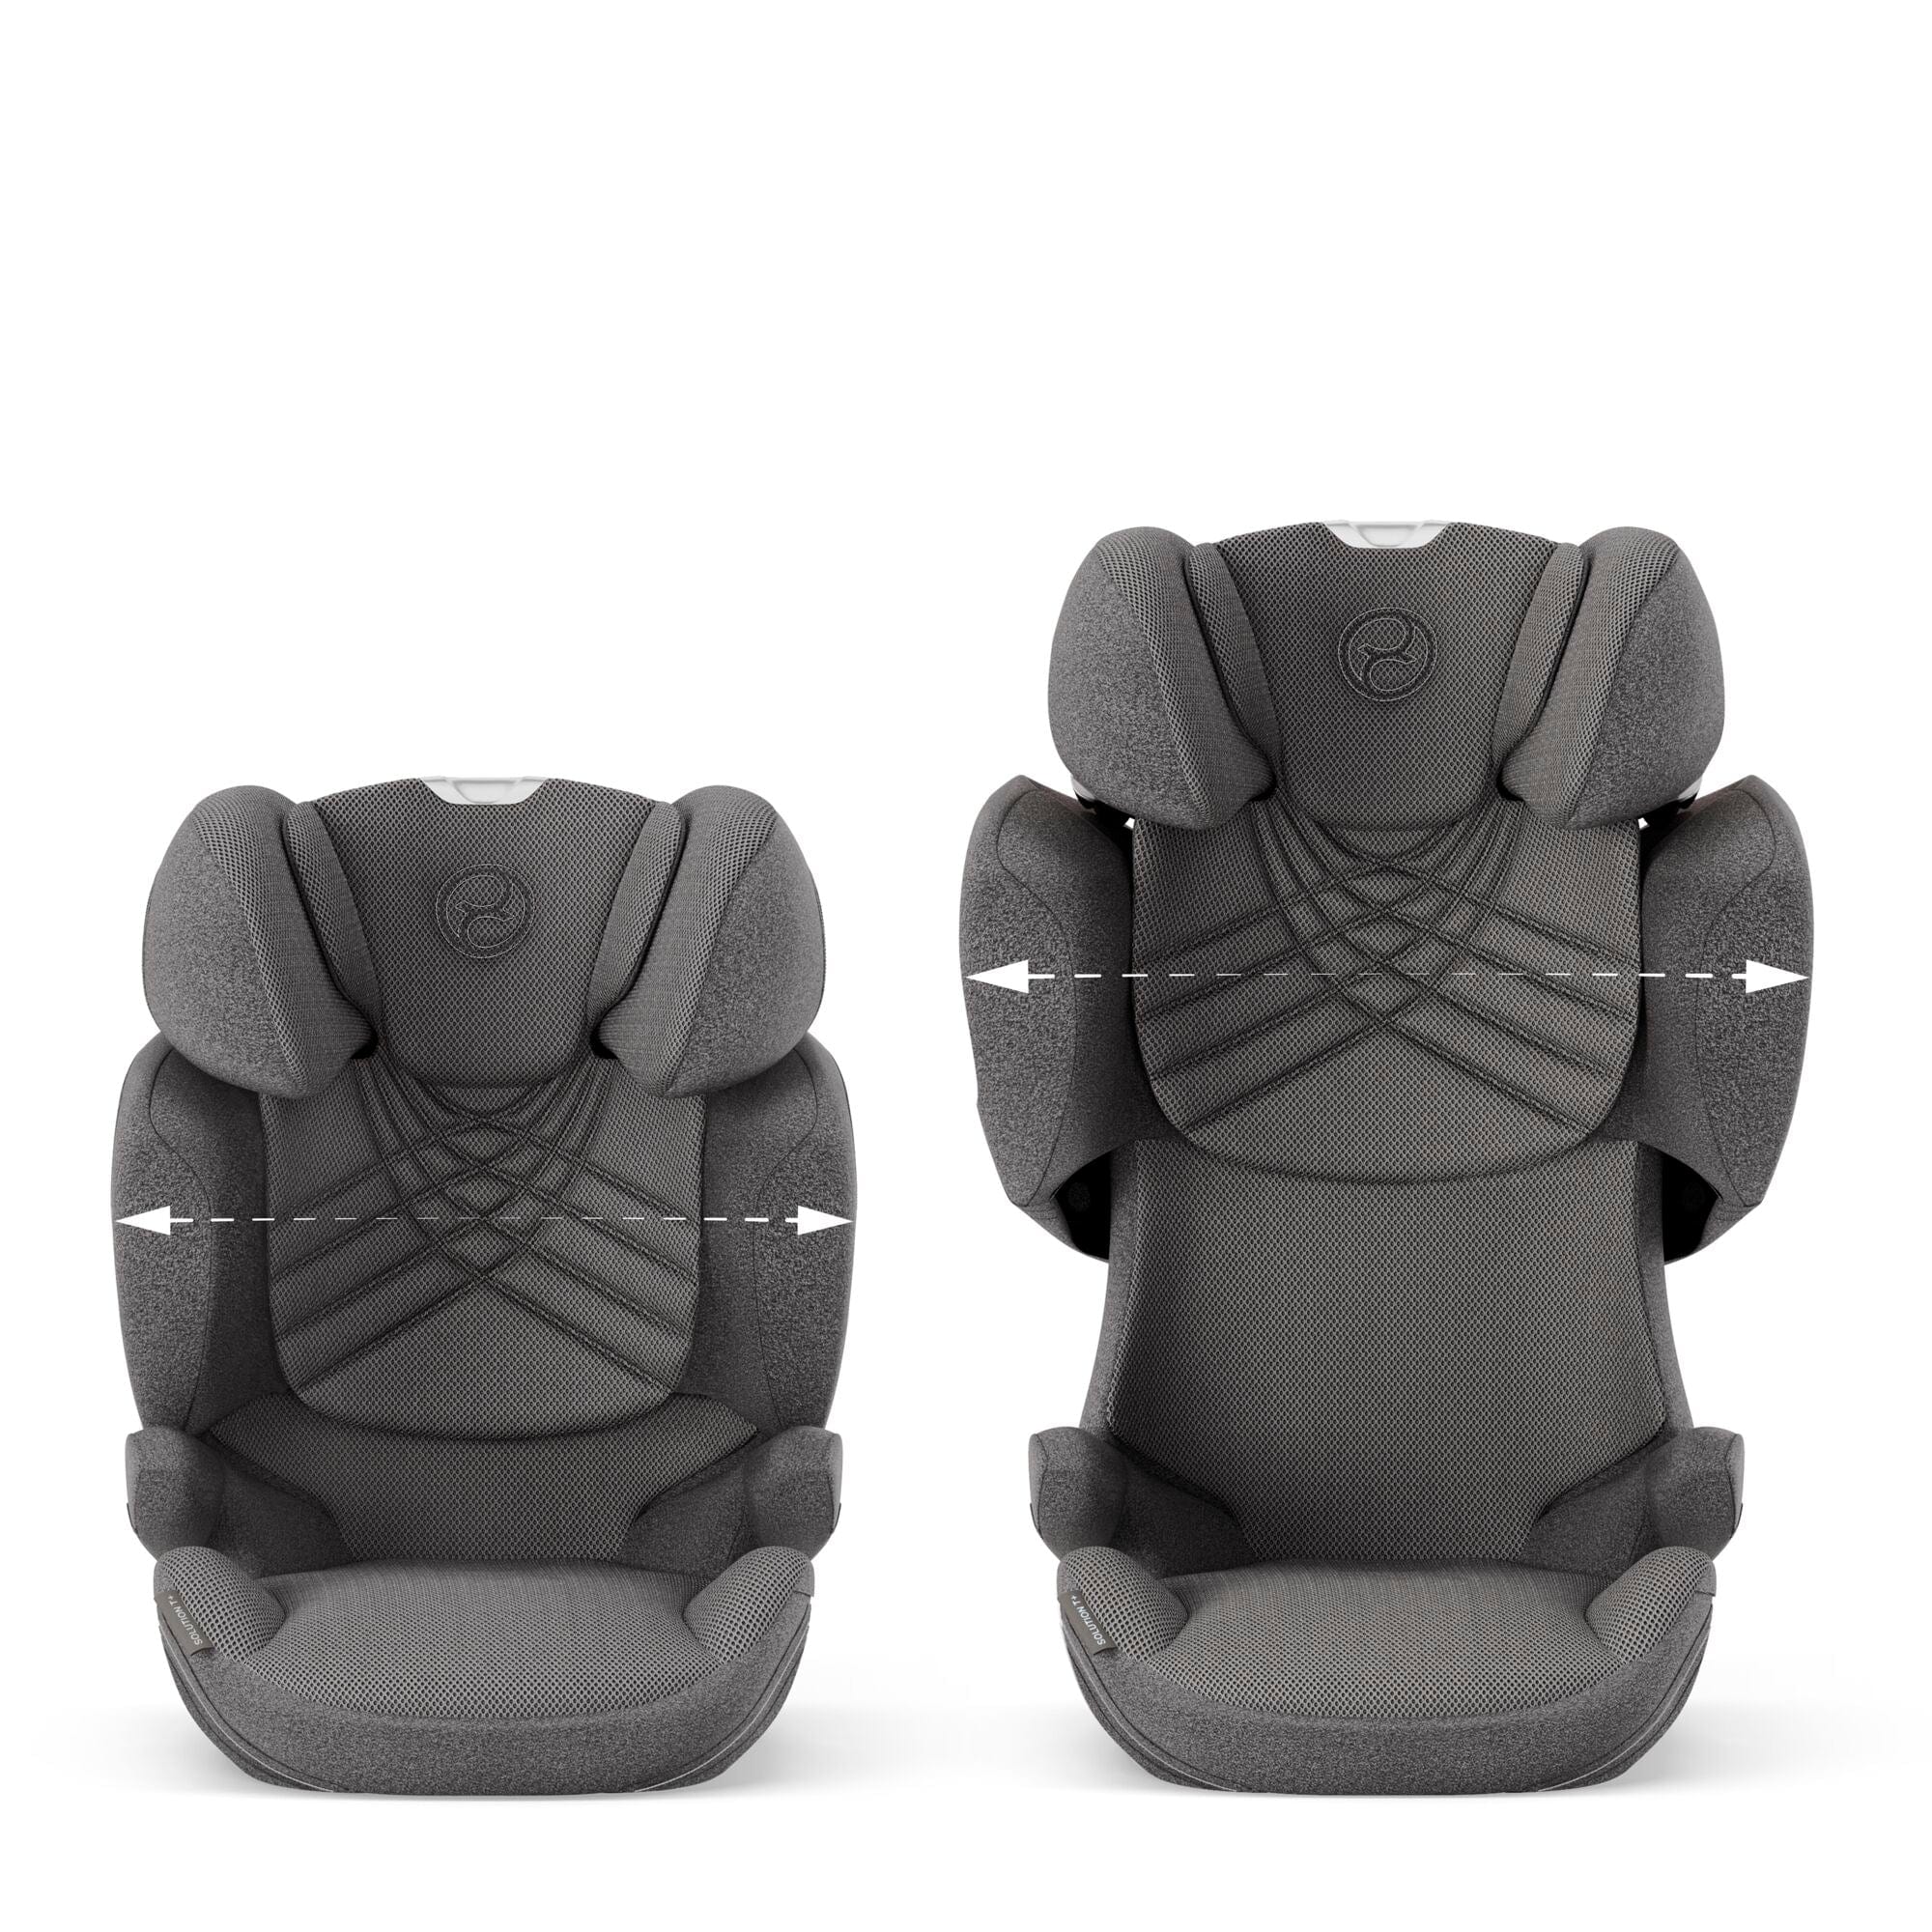 Cybex Solution T i-Fix Plus in Mirage Grey Highback Booster Seats 522004108 4063846380237